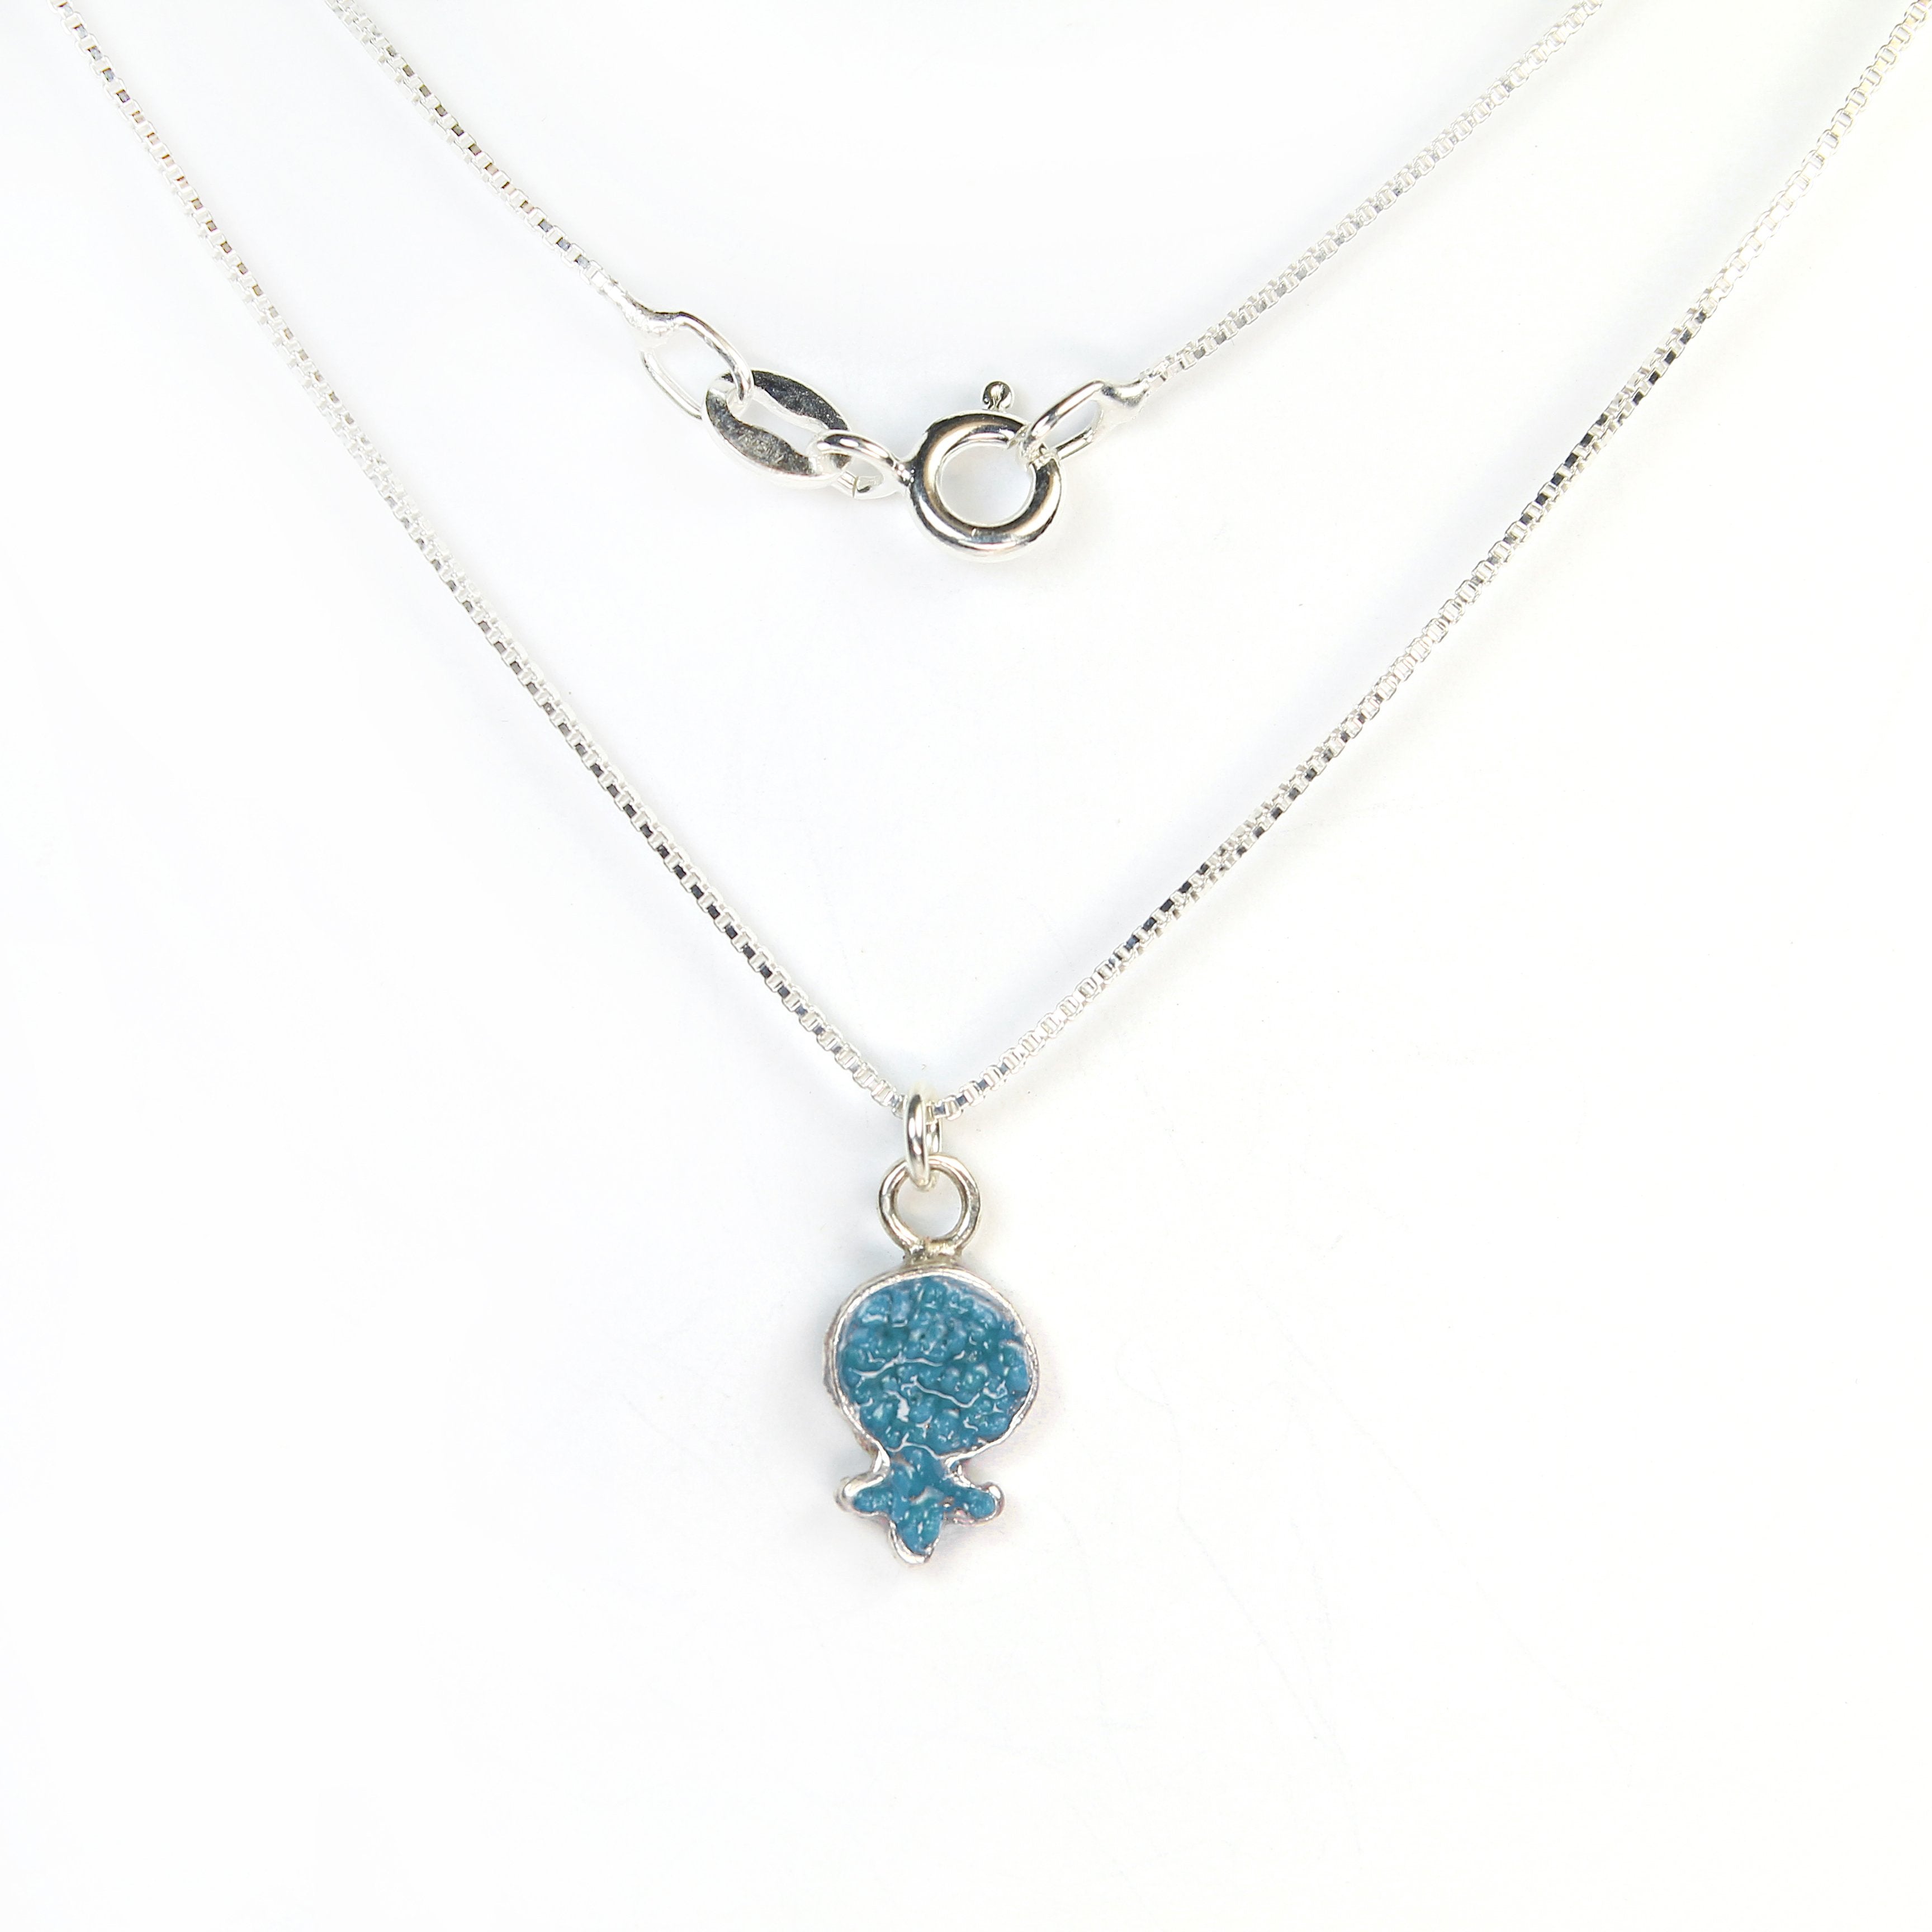 Small Turquoise Pomegranate Necklace with stones - Shulamit Kanter